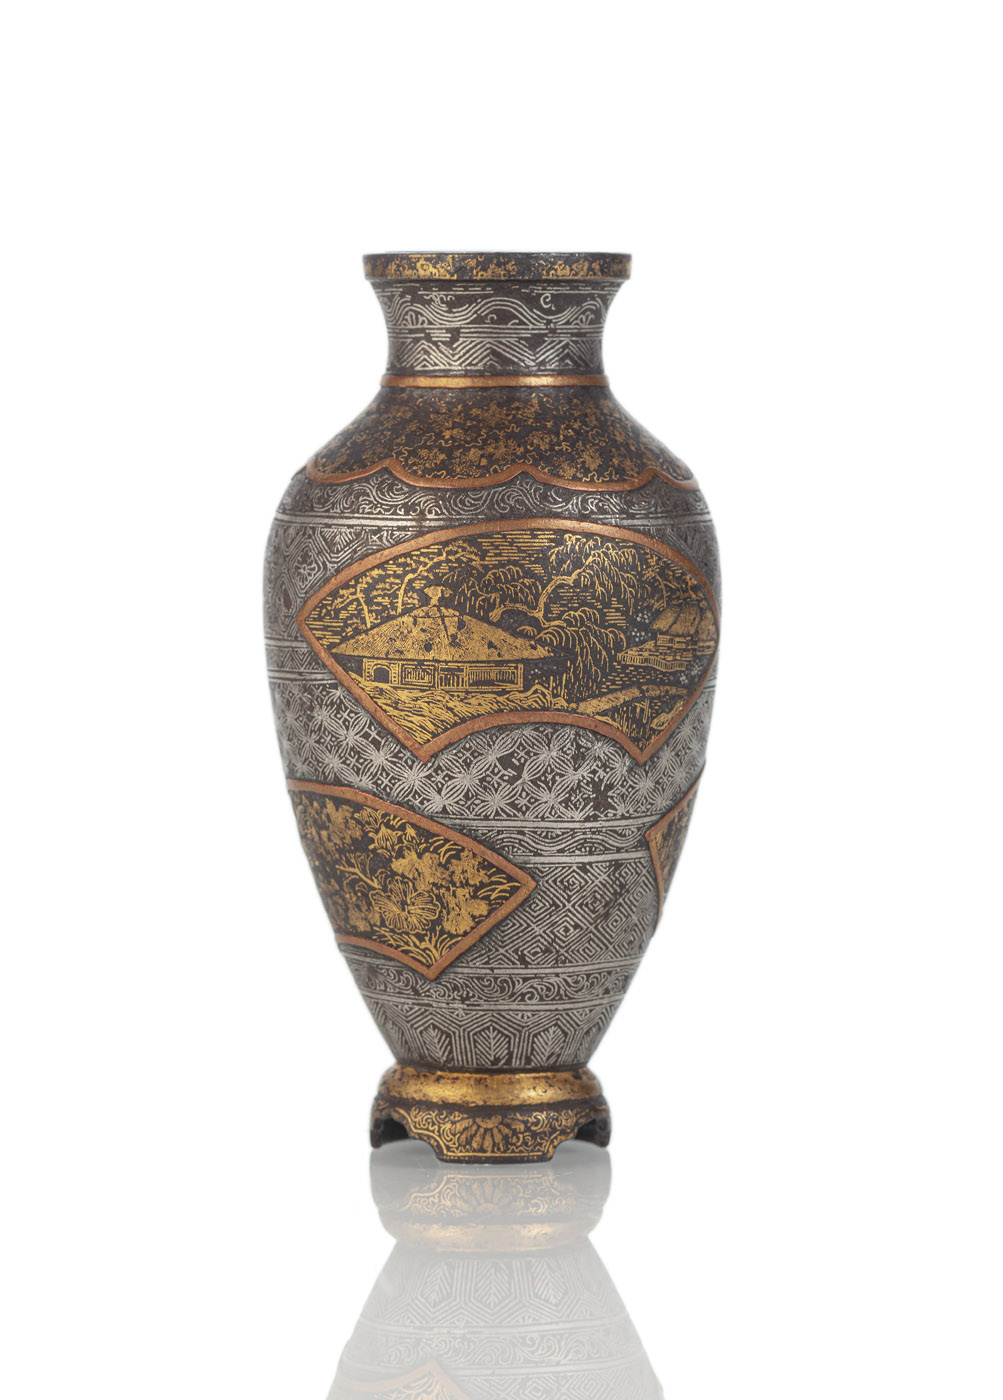 <b>A SMALL IORN VASE IN KOMAI STYLE</b>